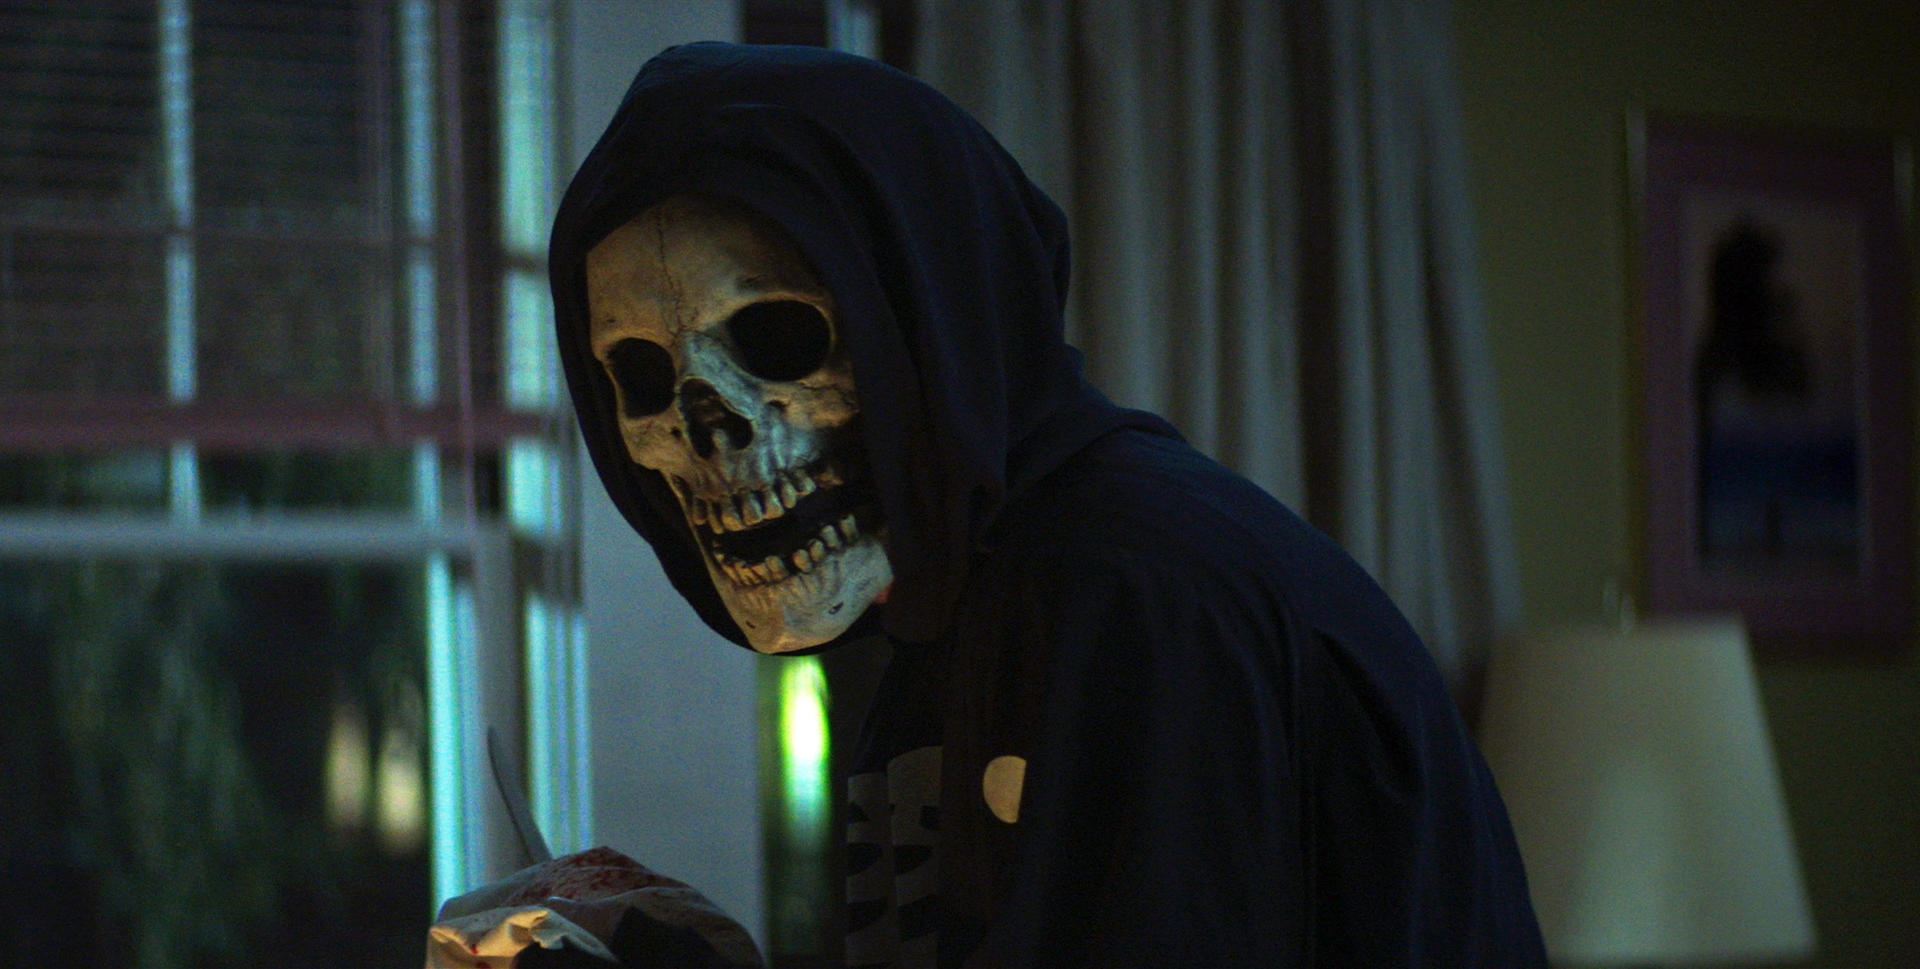 Jeremy Ford on the Fun Horror Ensemble of Netflix’s Fear Street Series [Exclusive Interview]